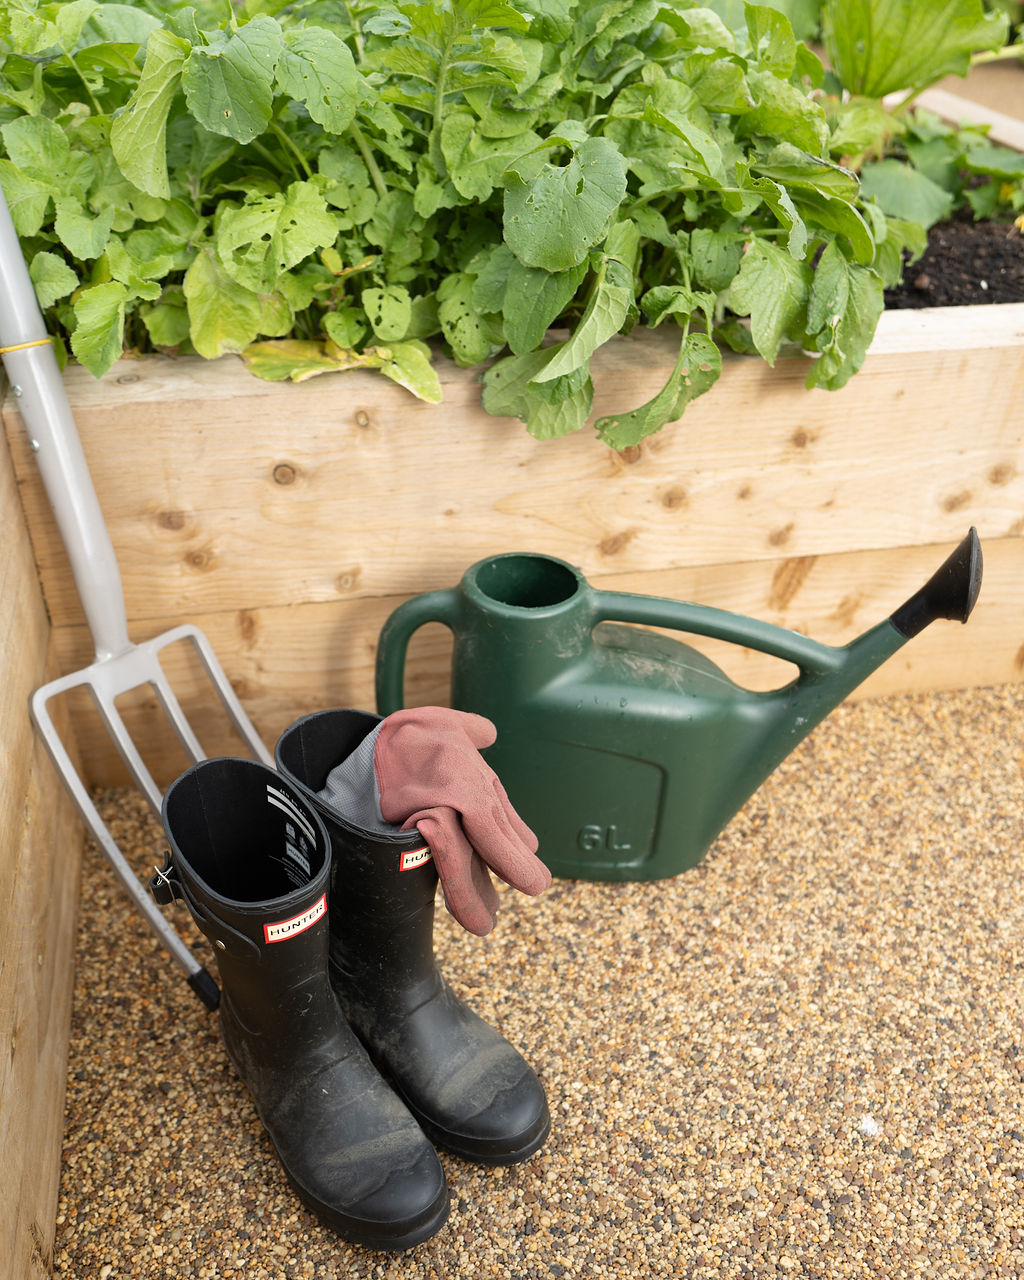 Gardening tools and wellington boots